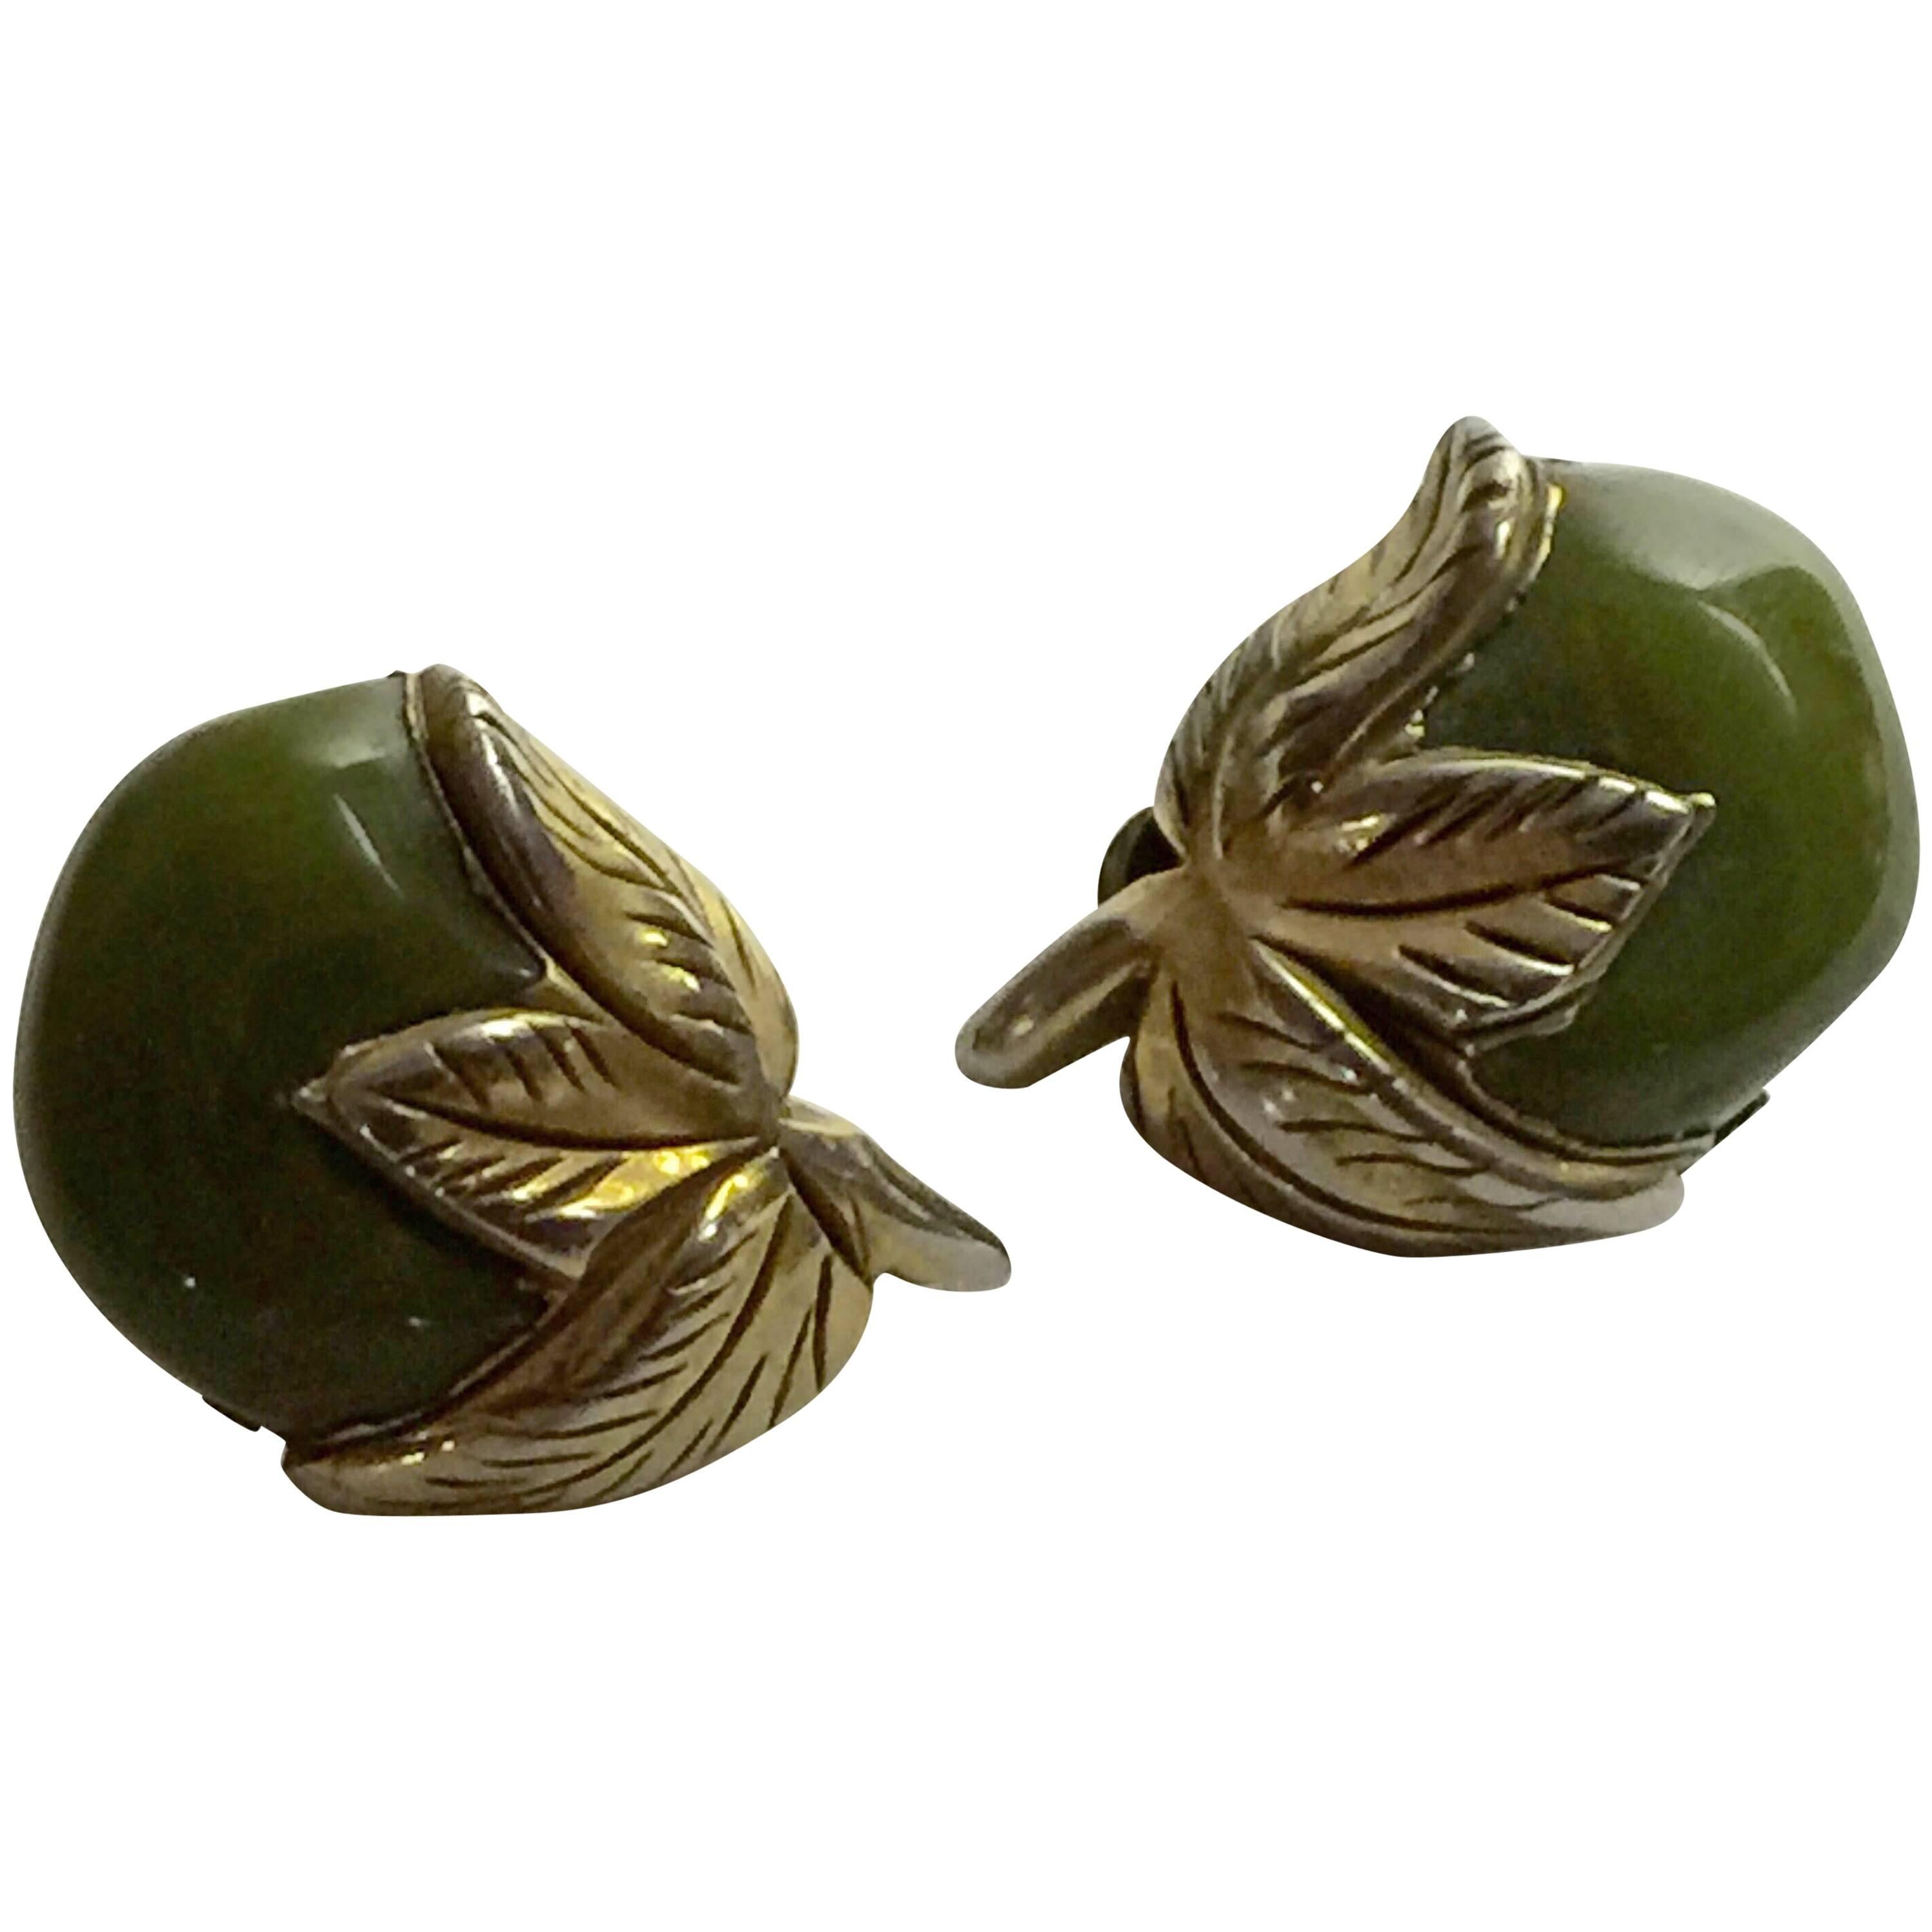 Canadian Clad 1930s Bakelite Clip On Earrings Green Fruits! For Sale